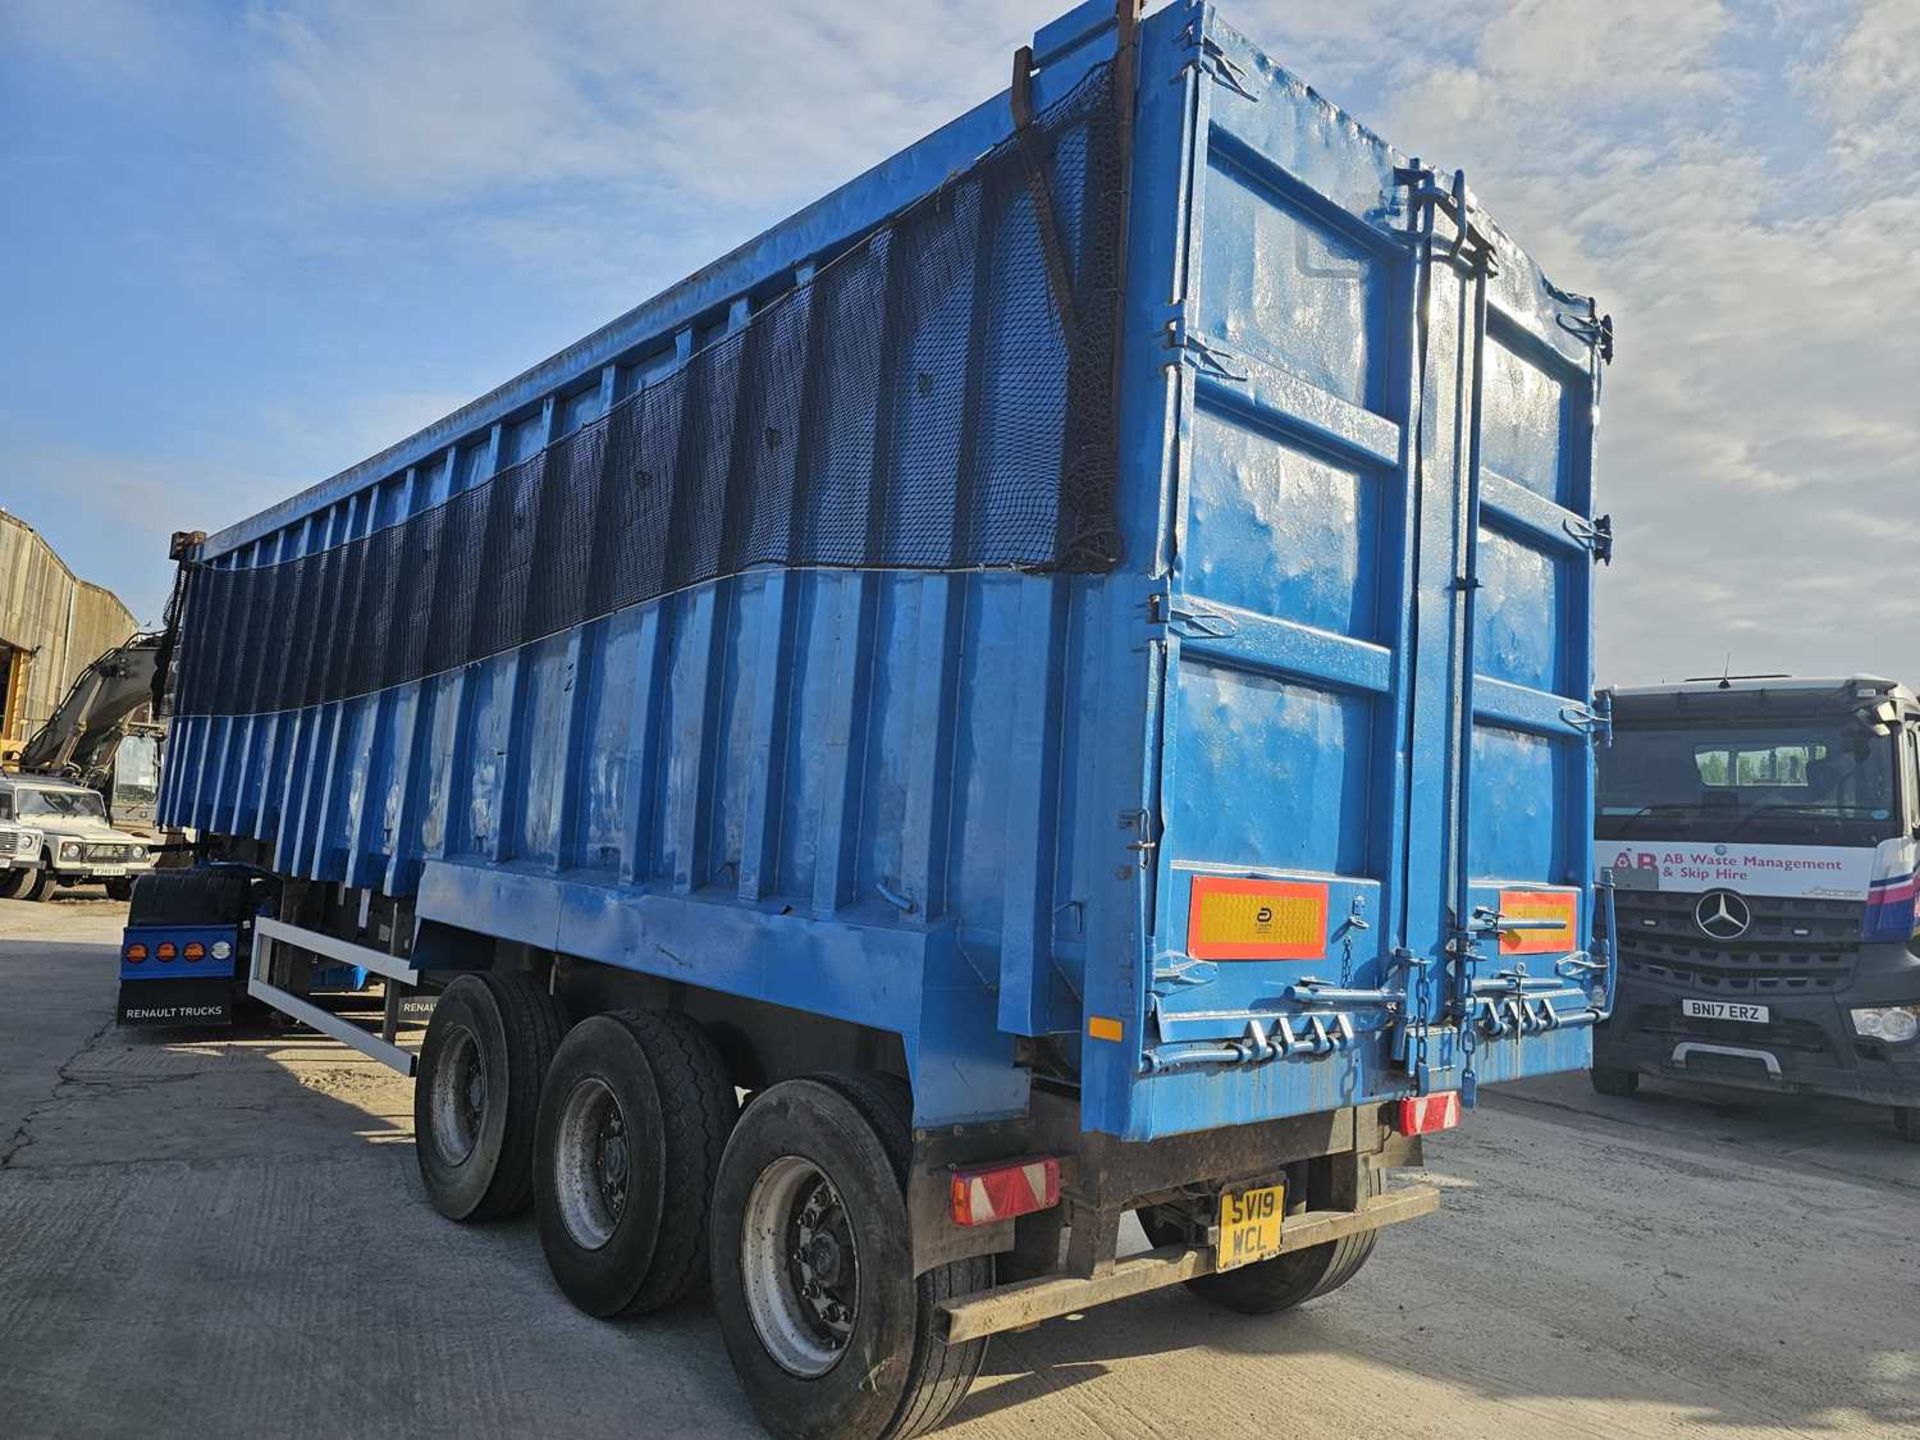 2008 Montracon Tri axle Bulk Tipping Trailer, WLI, 50/50 Sheets, Barn Doors (Tested 03/25) - Image 2 of 14